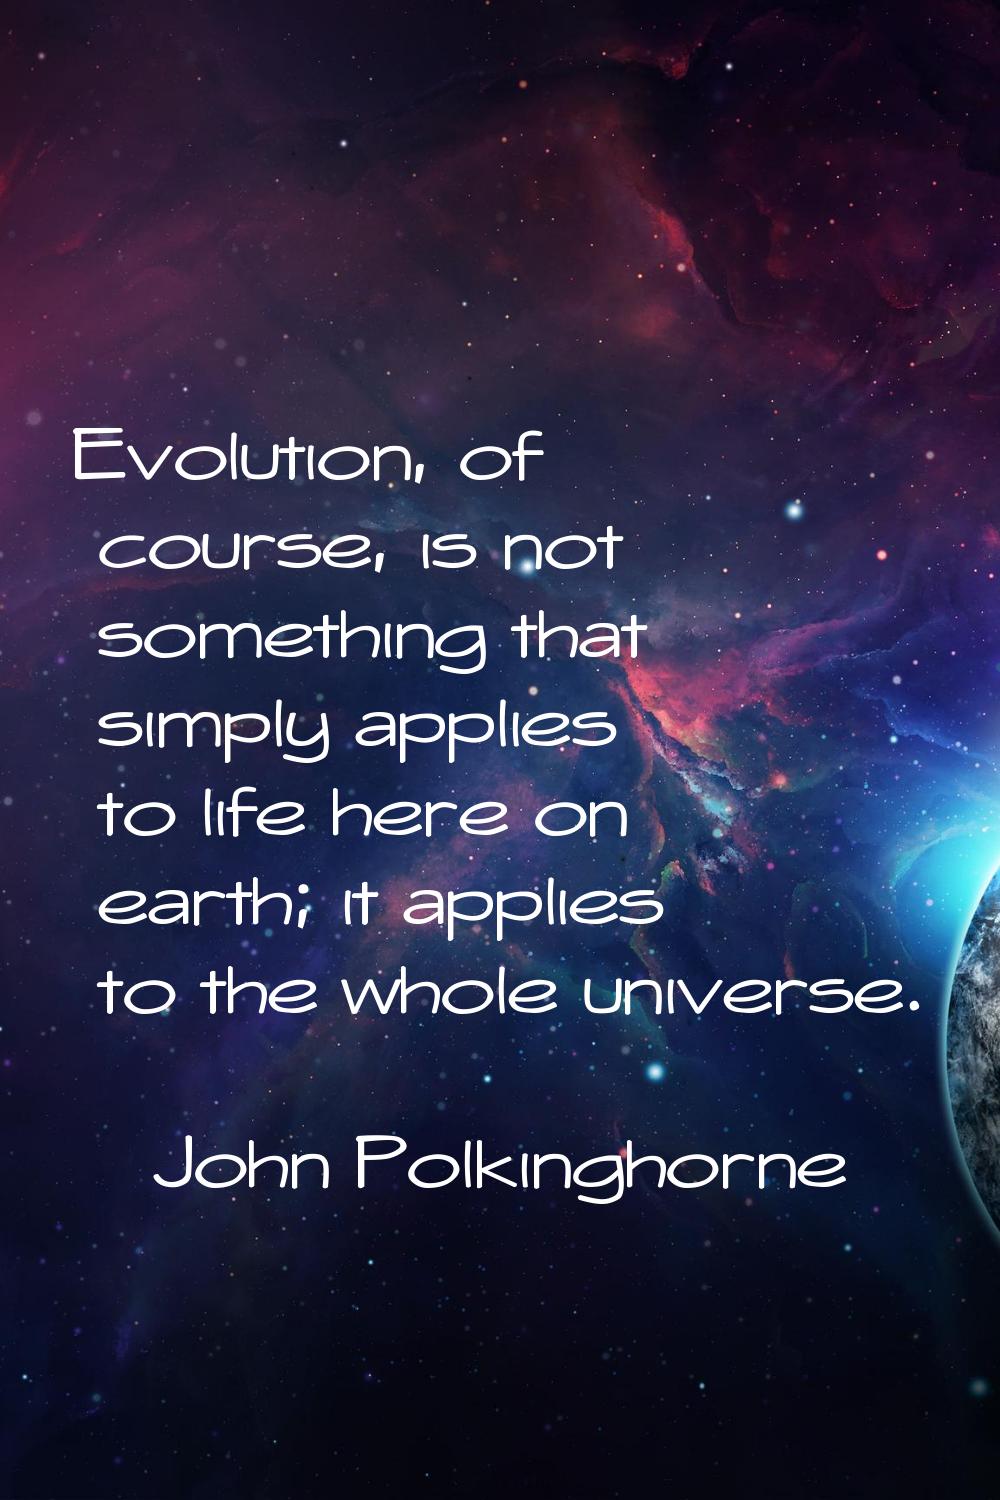 Evolution, of course, is not something that simply applies to life here on earth; it applies to the